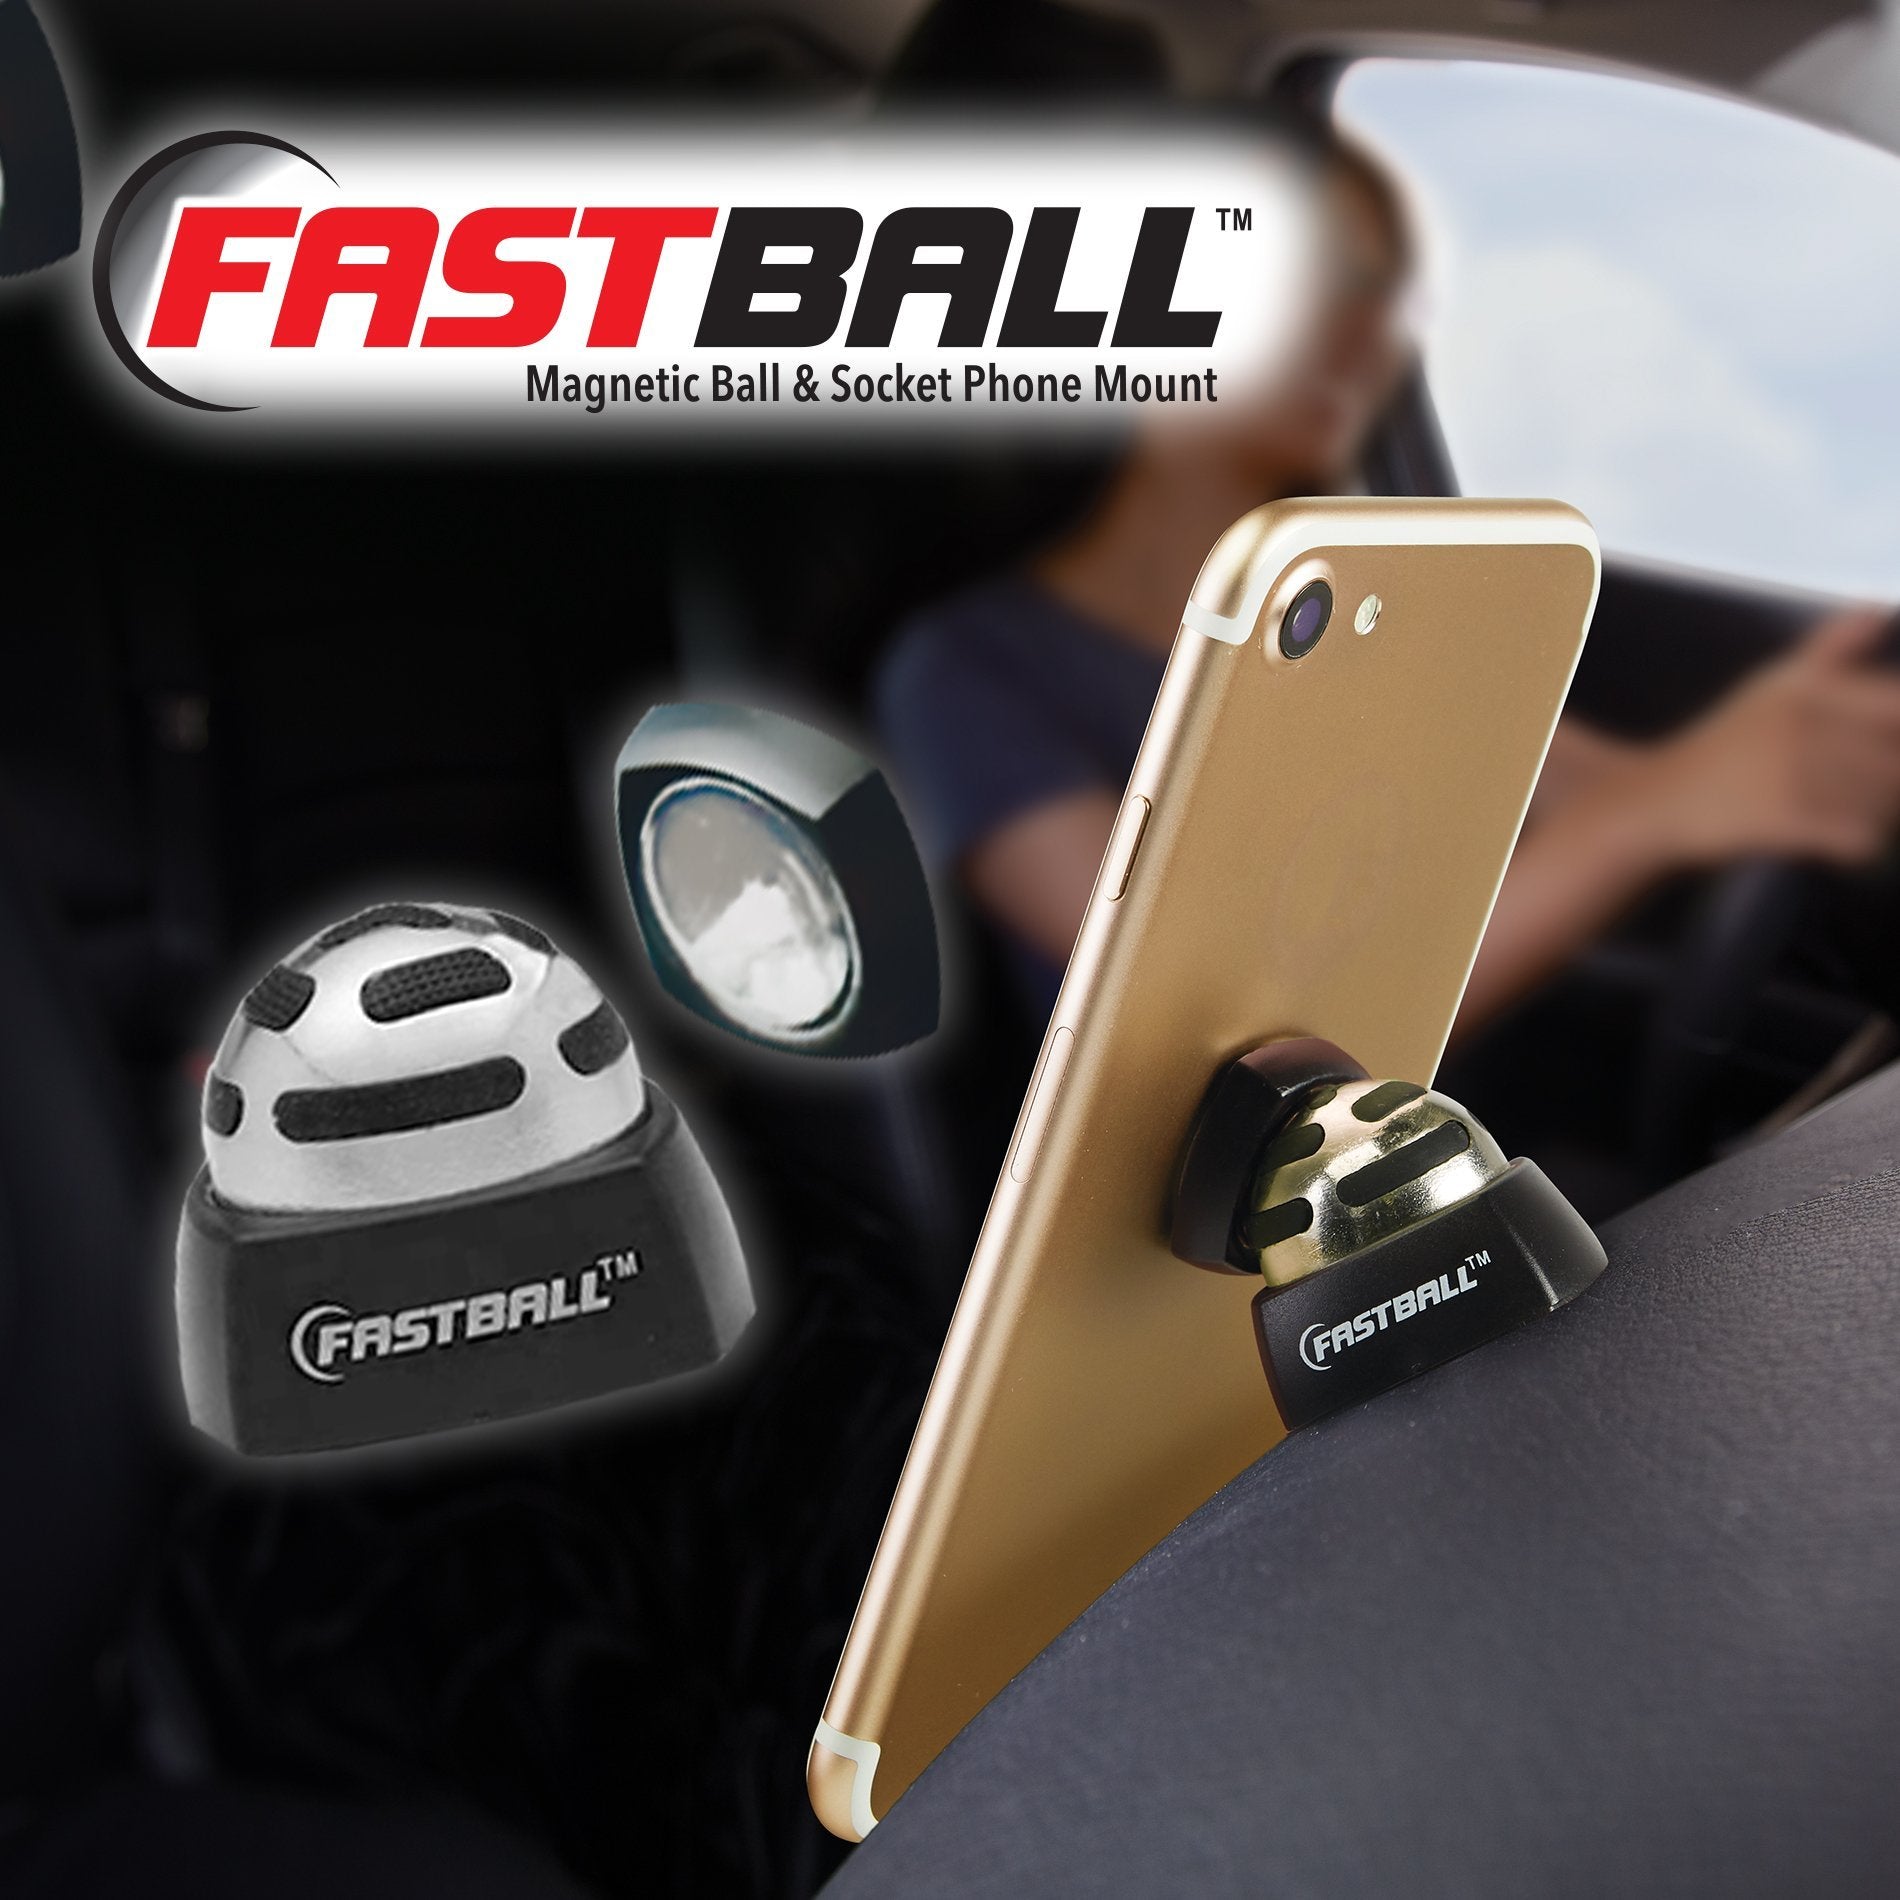 Close up of FastBall and a Fastball mounted in car with a smartphone on it. Headline says FastBall Magnetic Ball And Socket Phone Mount